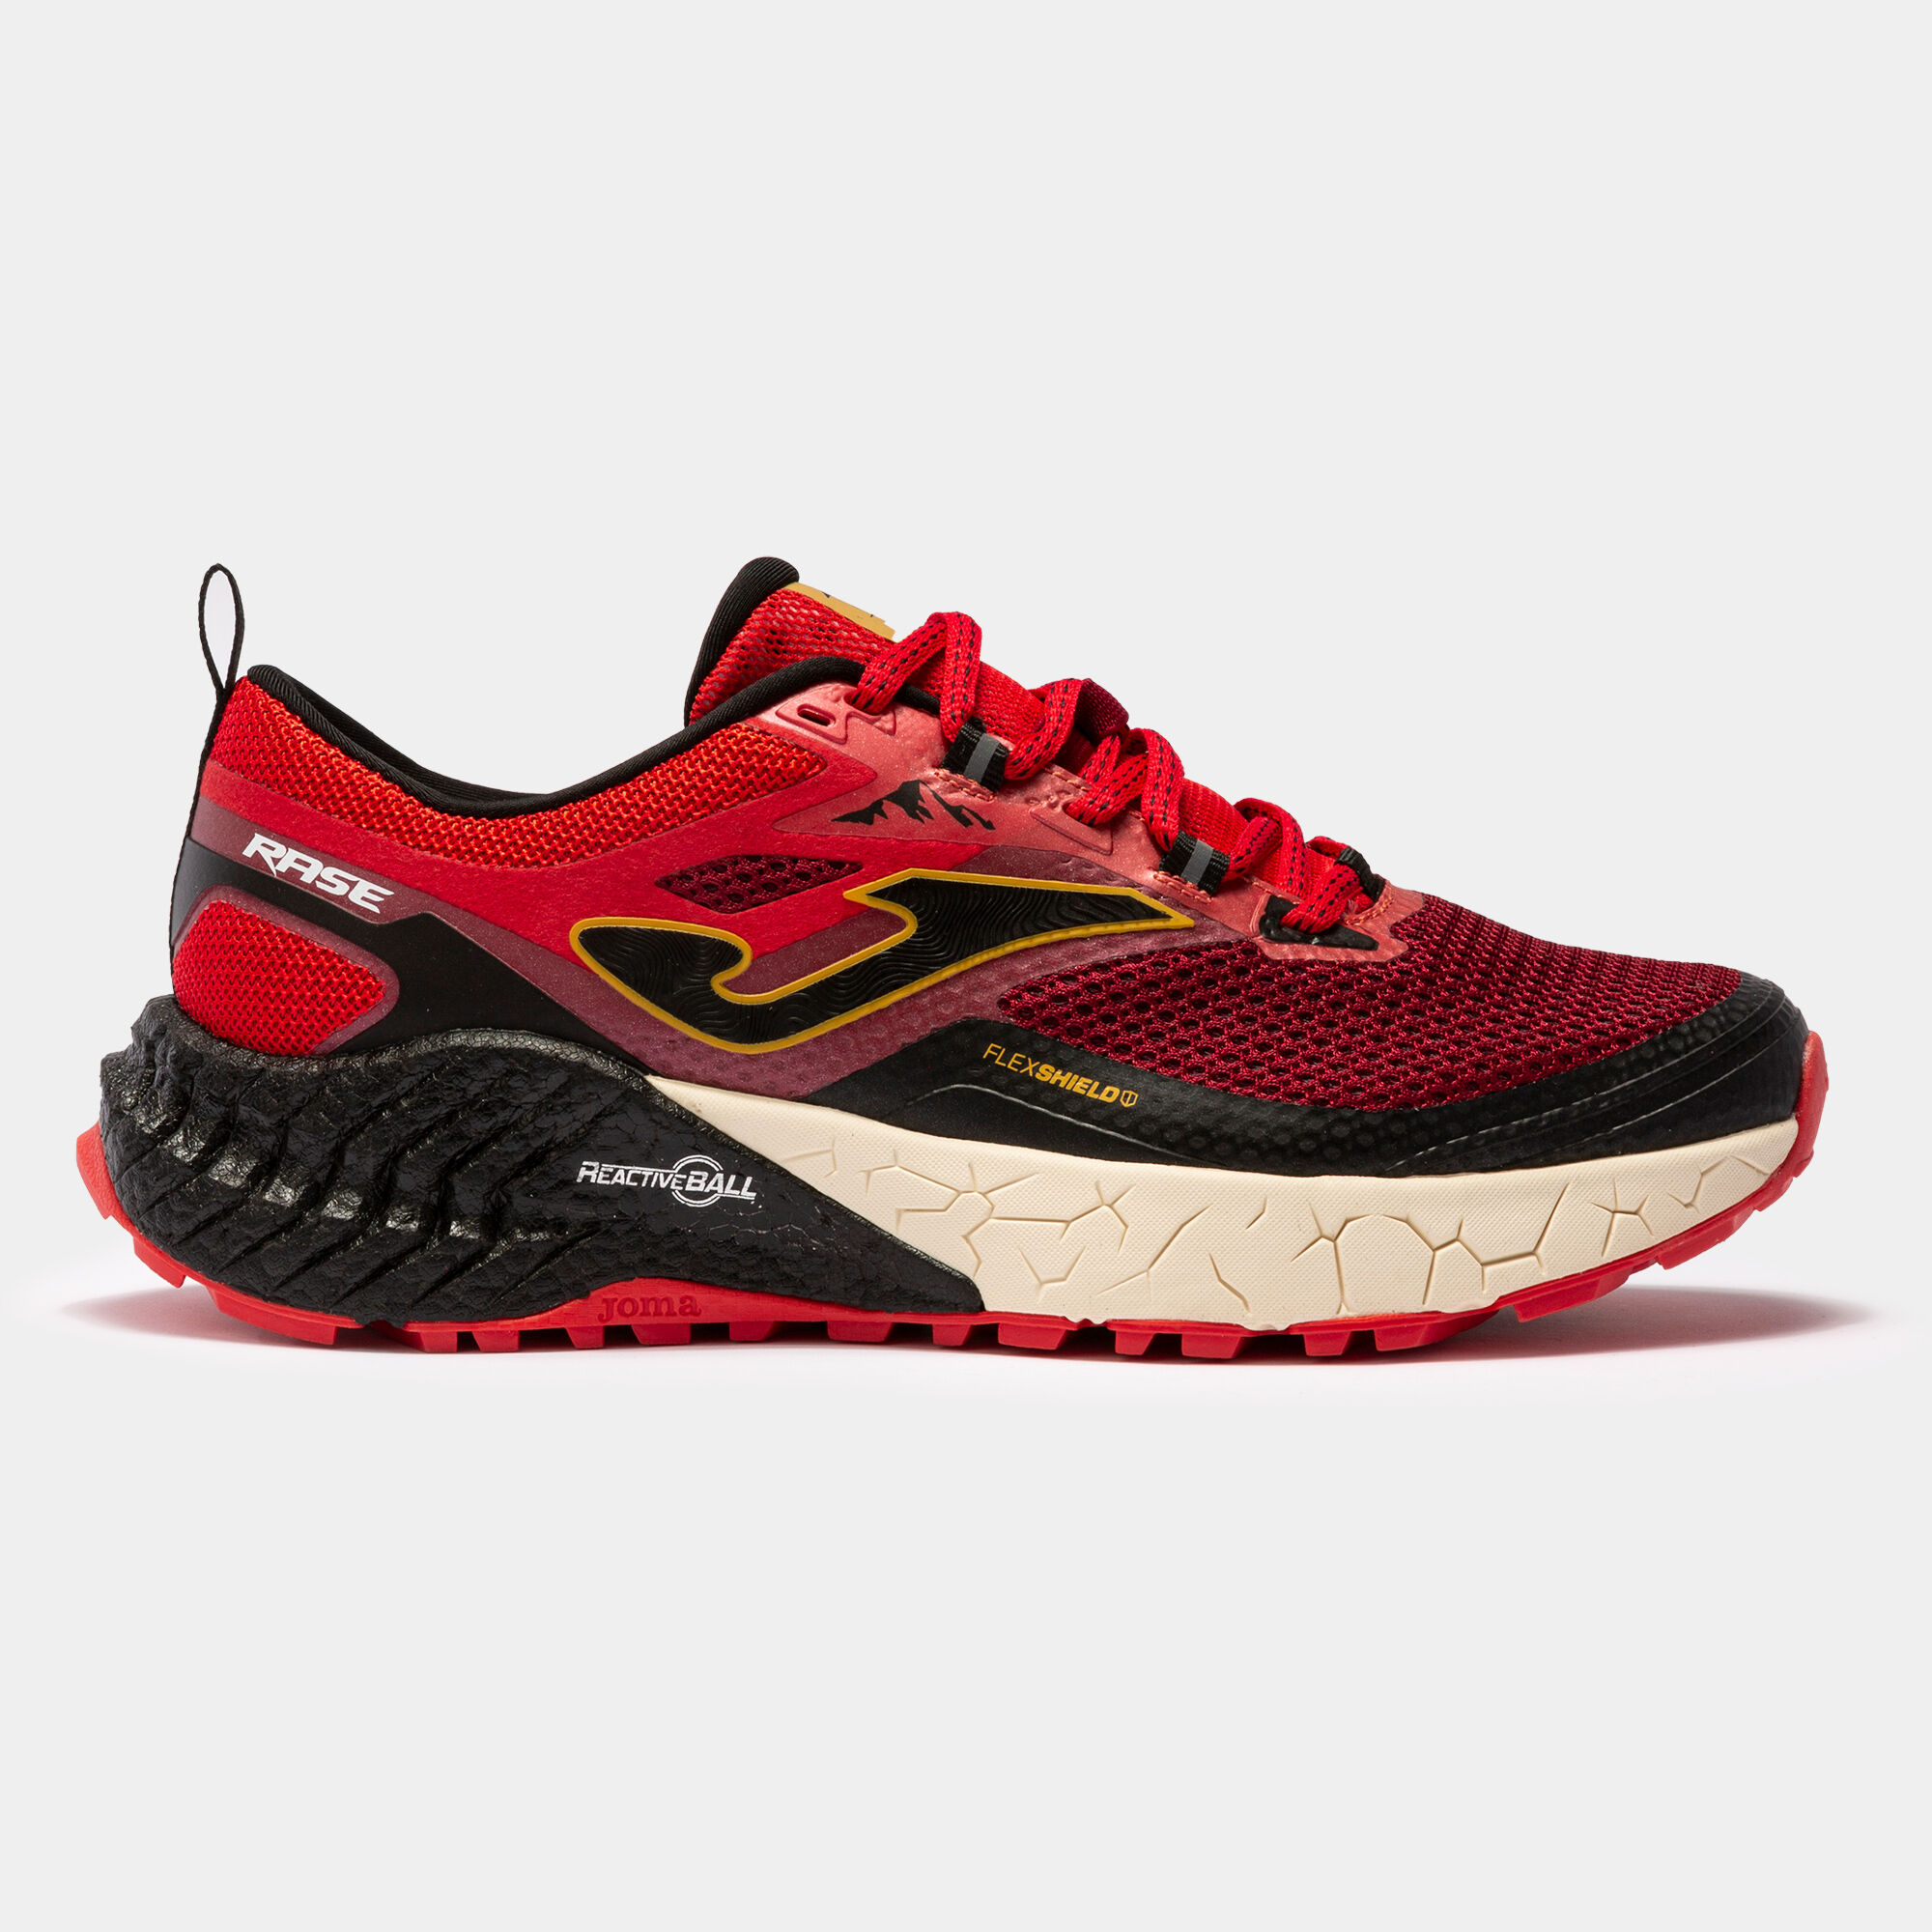 Joma Rase Trail Running Shoes Red